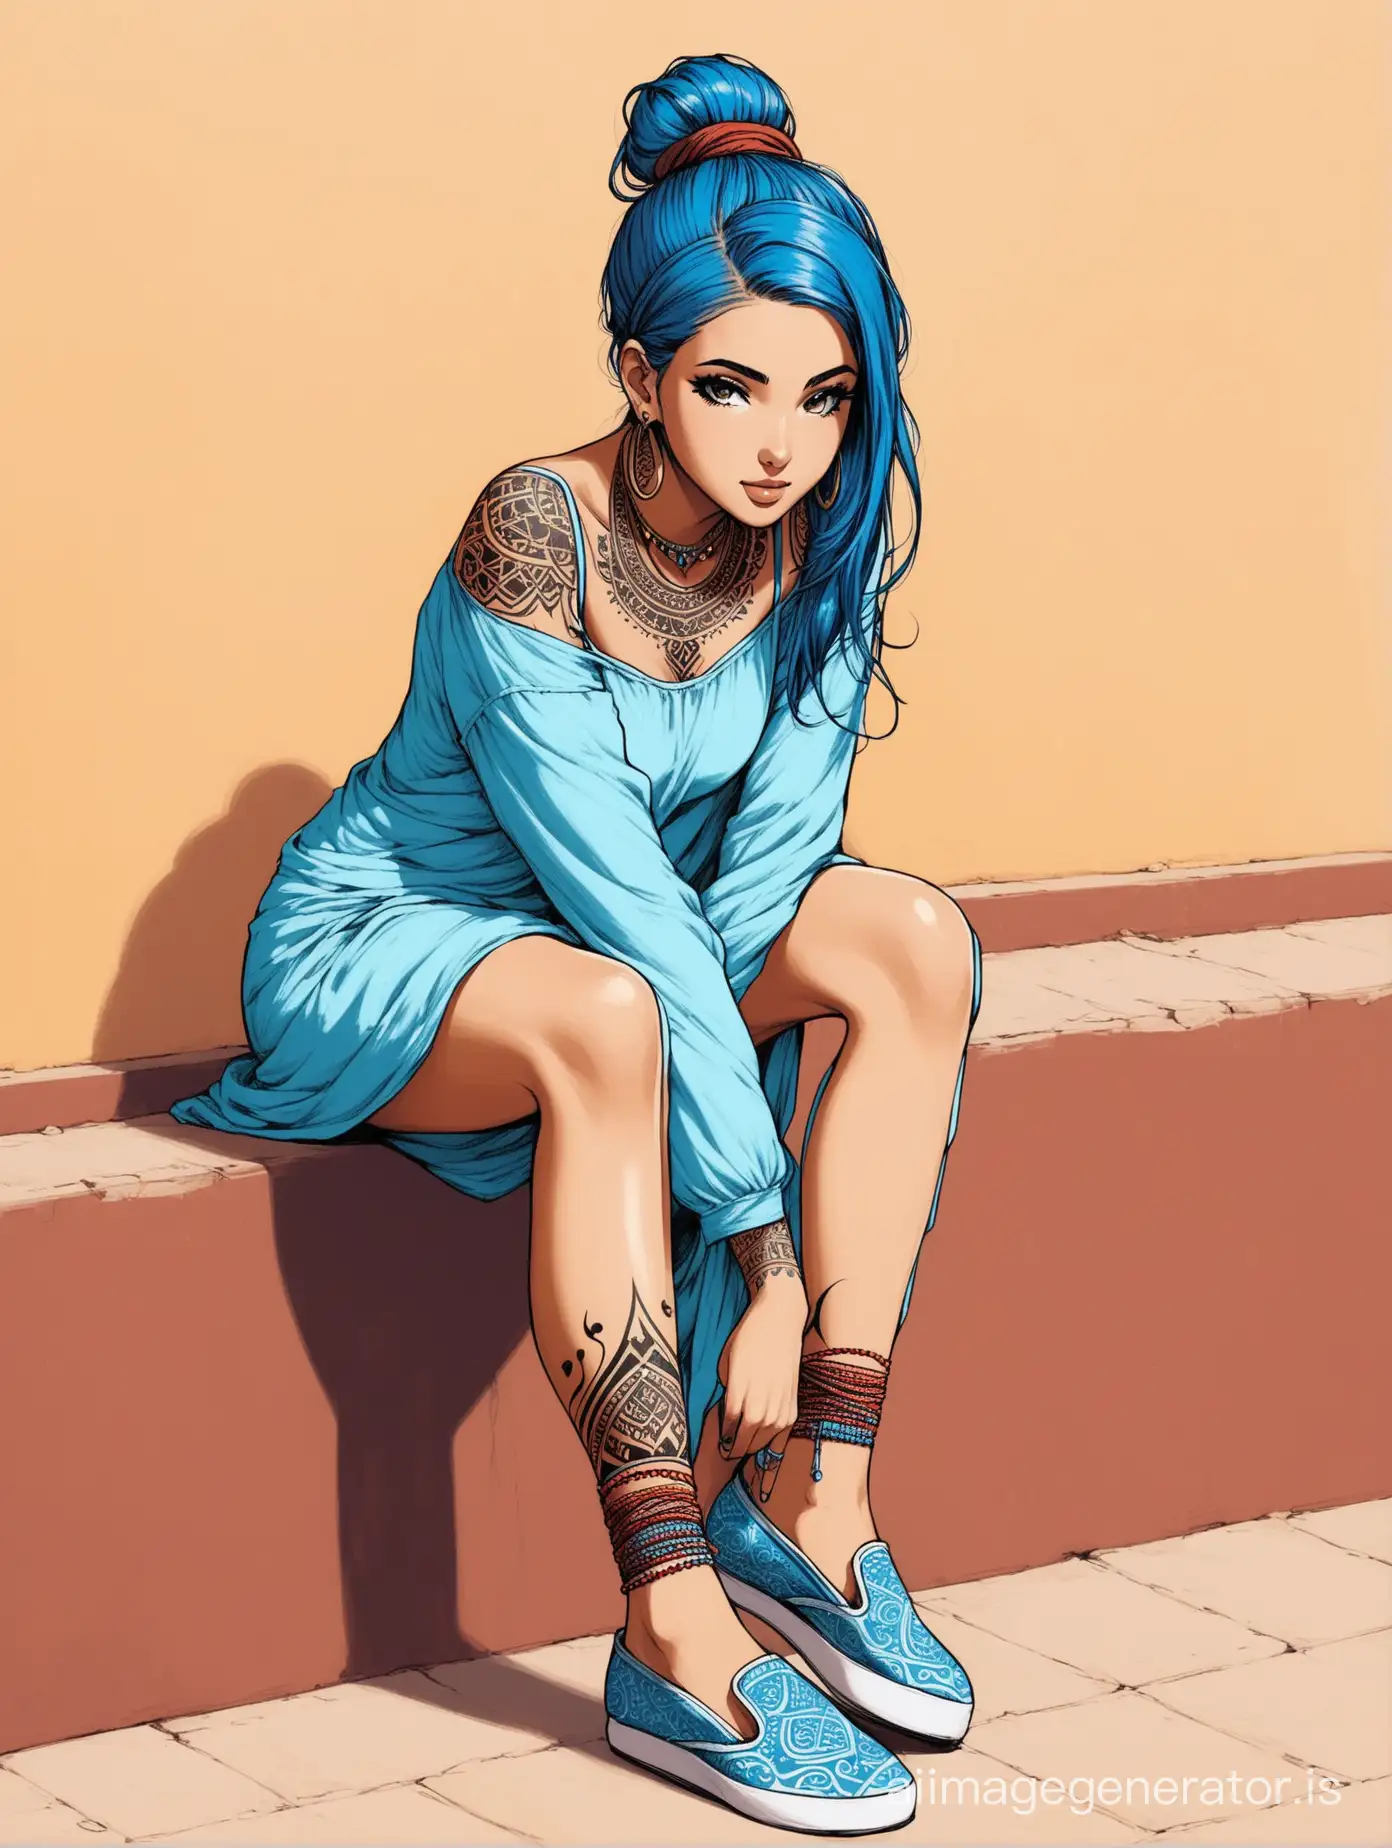 Bohemian-Gypsy-Girl-with-Blue-Hair-and-Arabian-Tattoo-Wearing-SlipOns-Pumps-Shoes